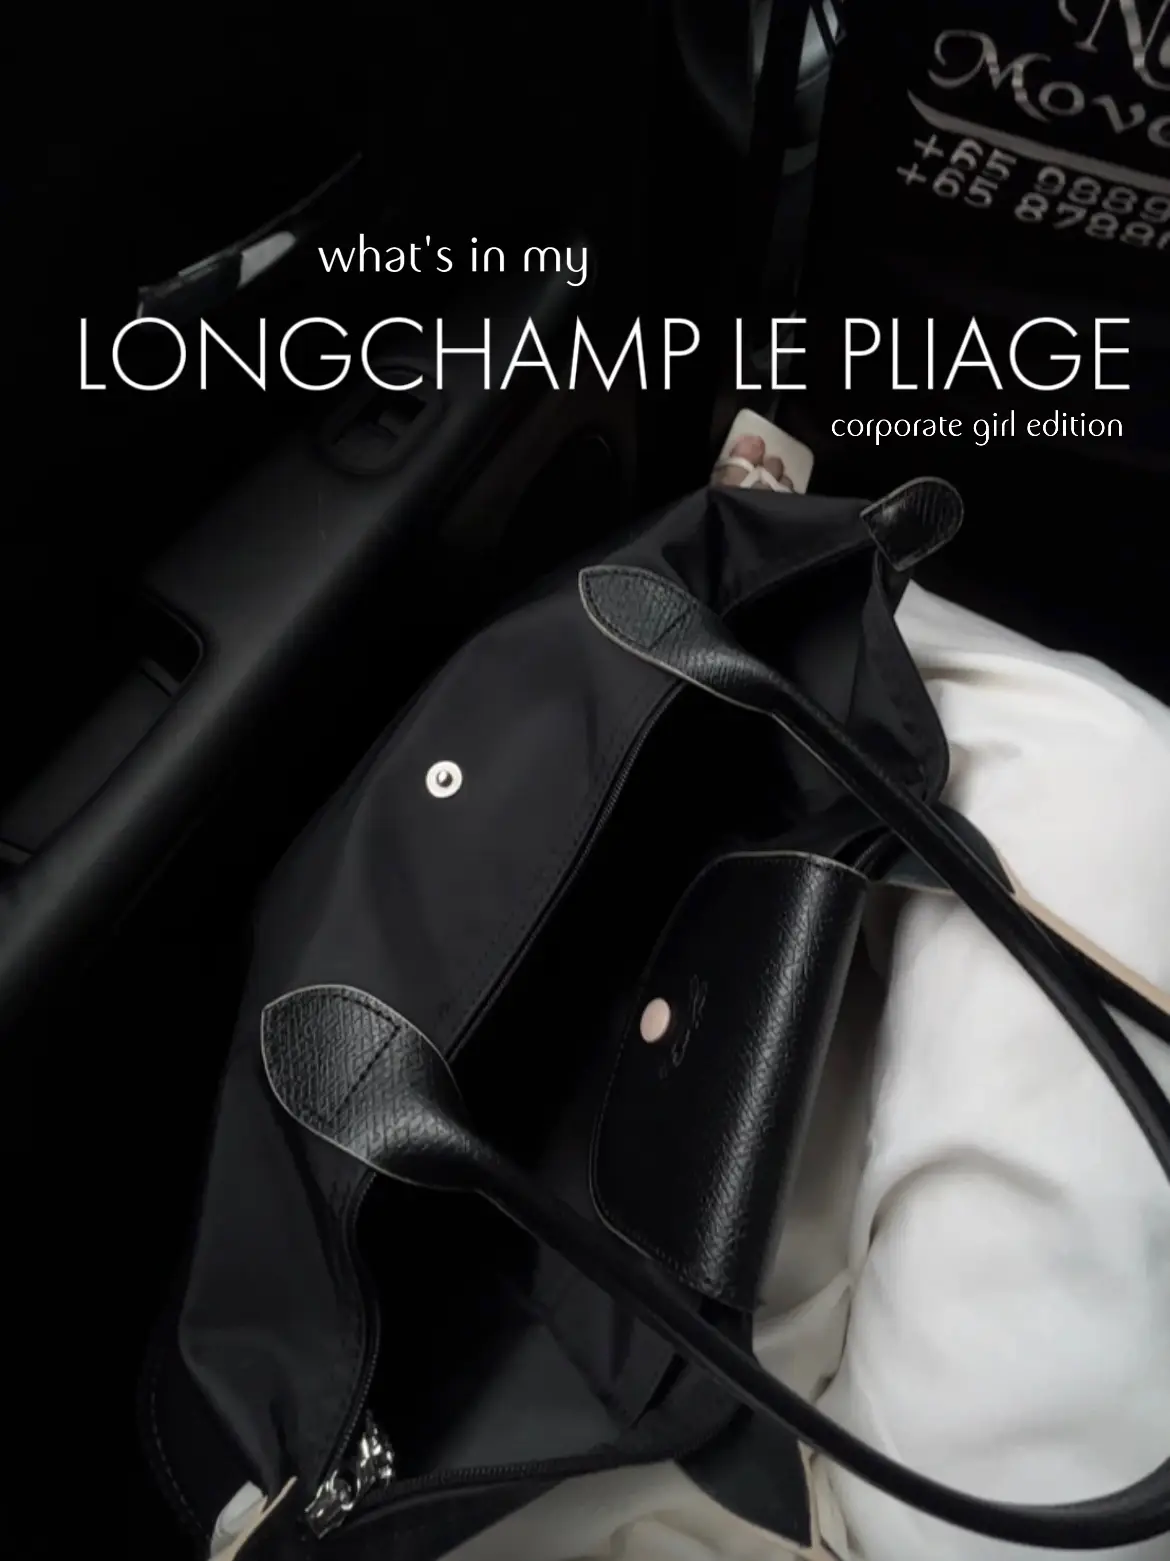 Must admit, I've never really had a lot of interest in Longchamp